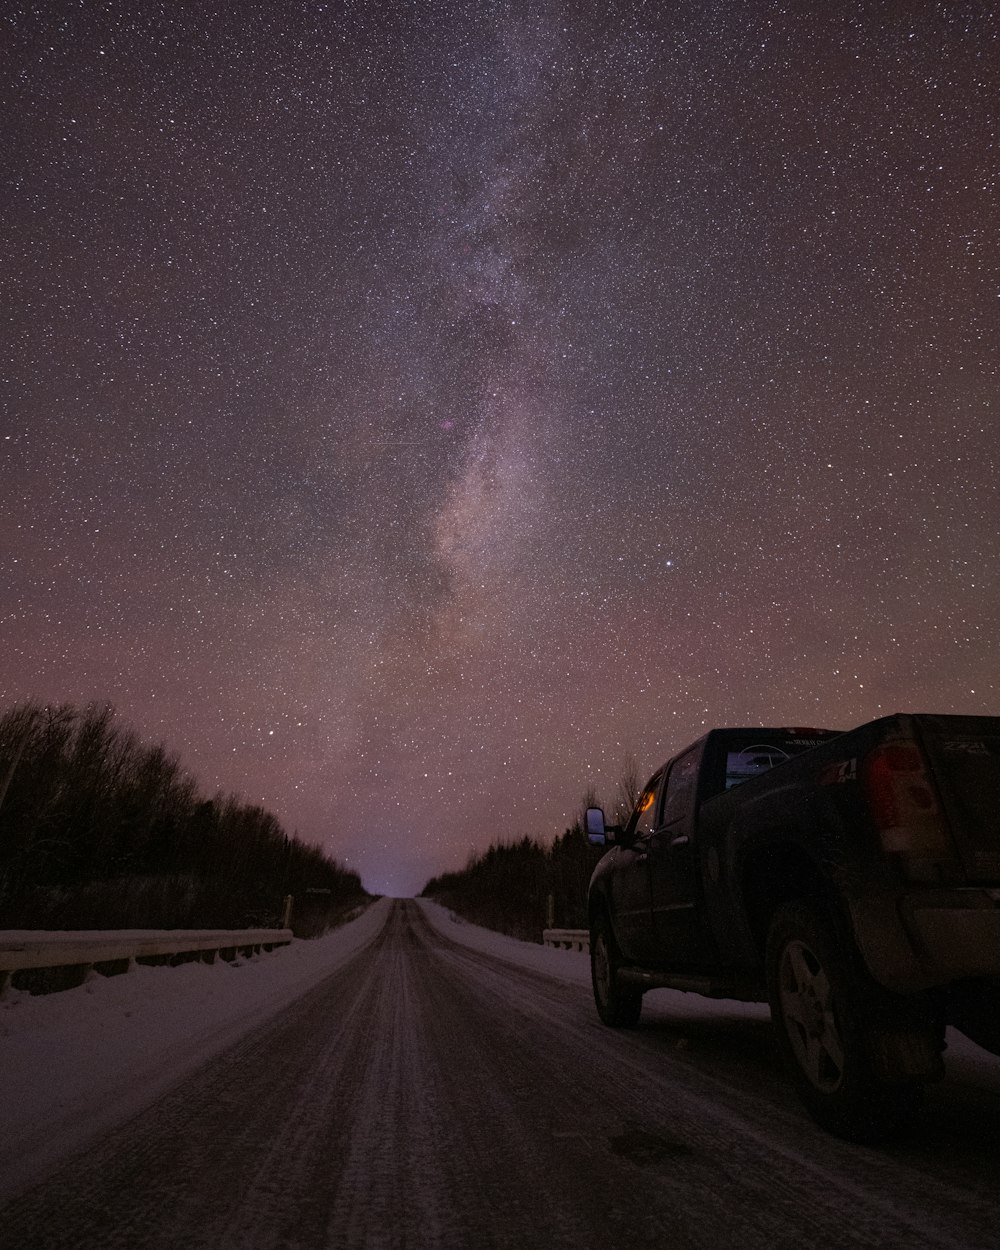 a truck driving down a road under a night sky filled with stars